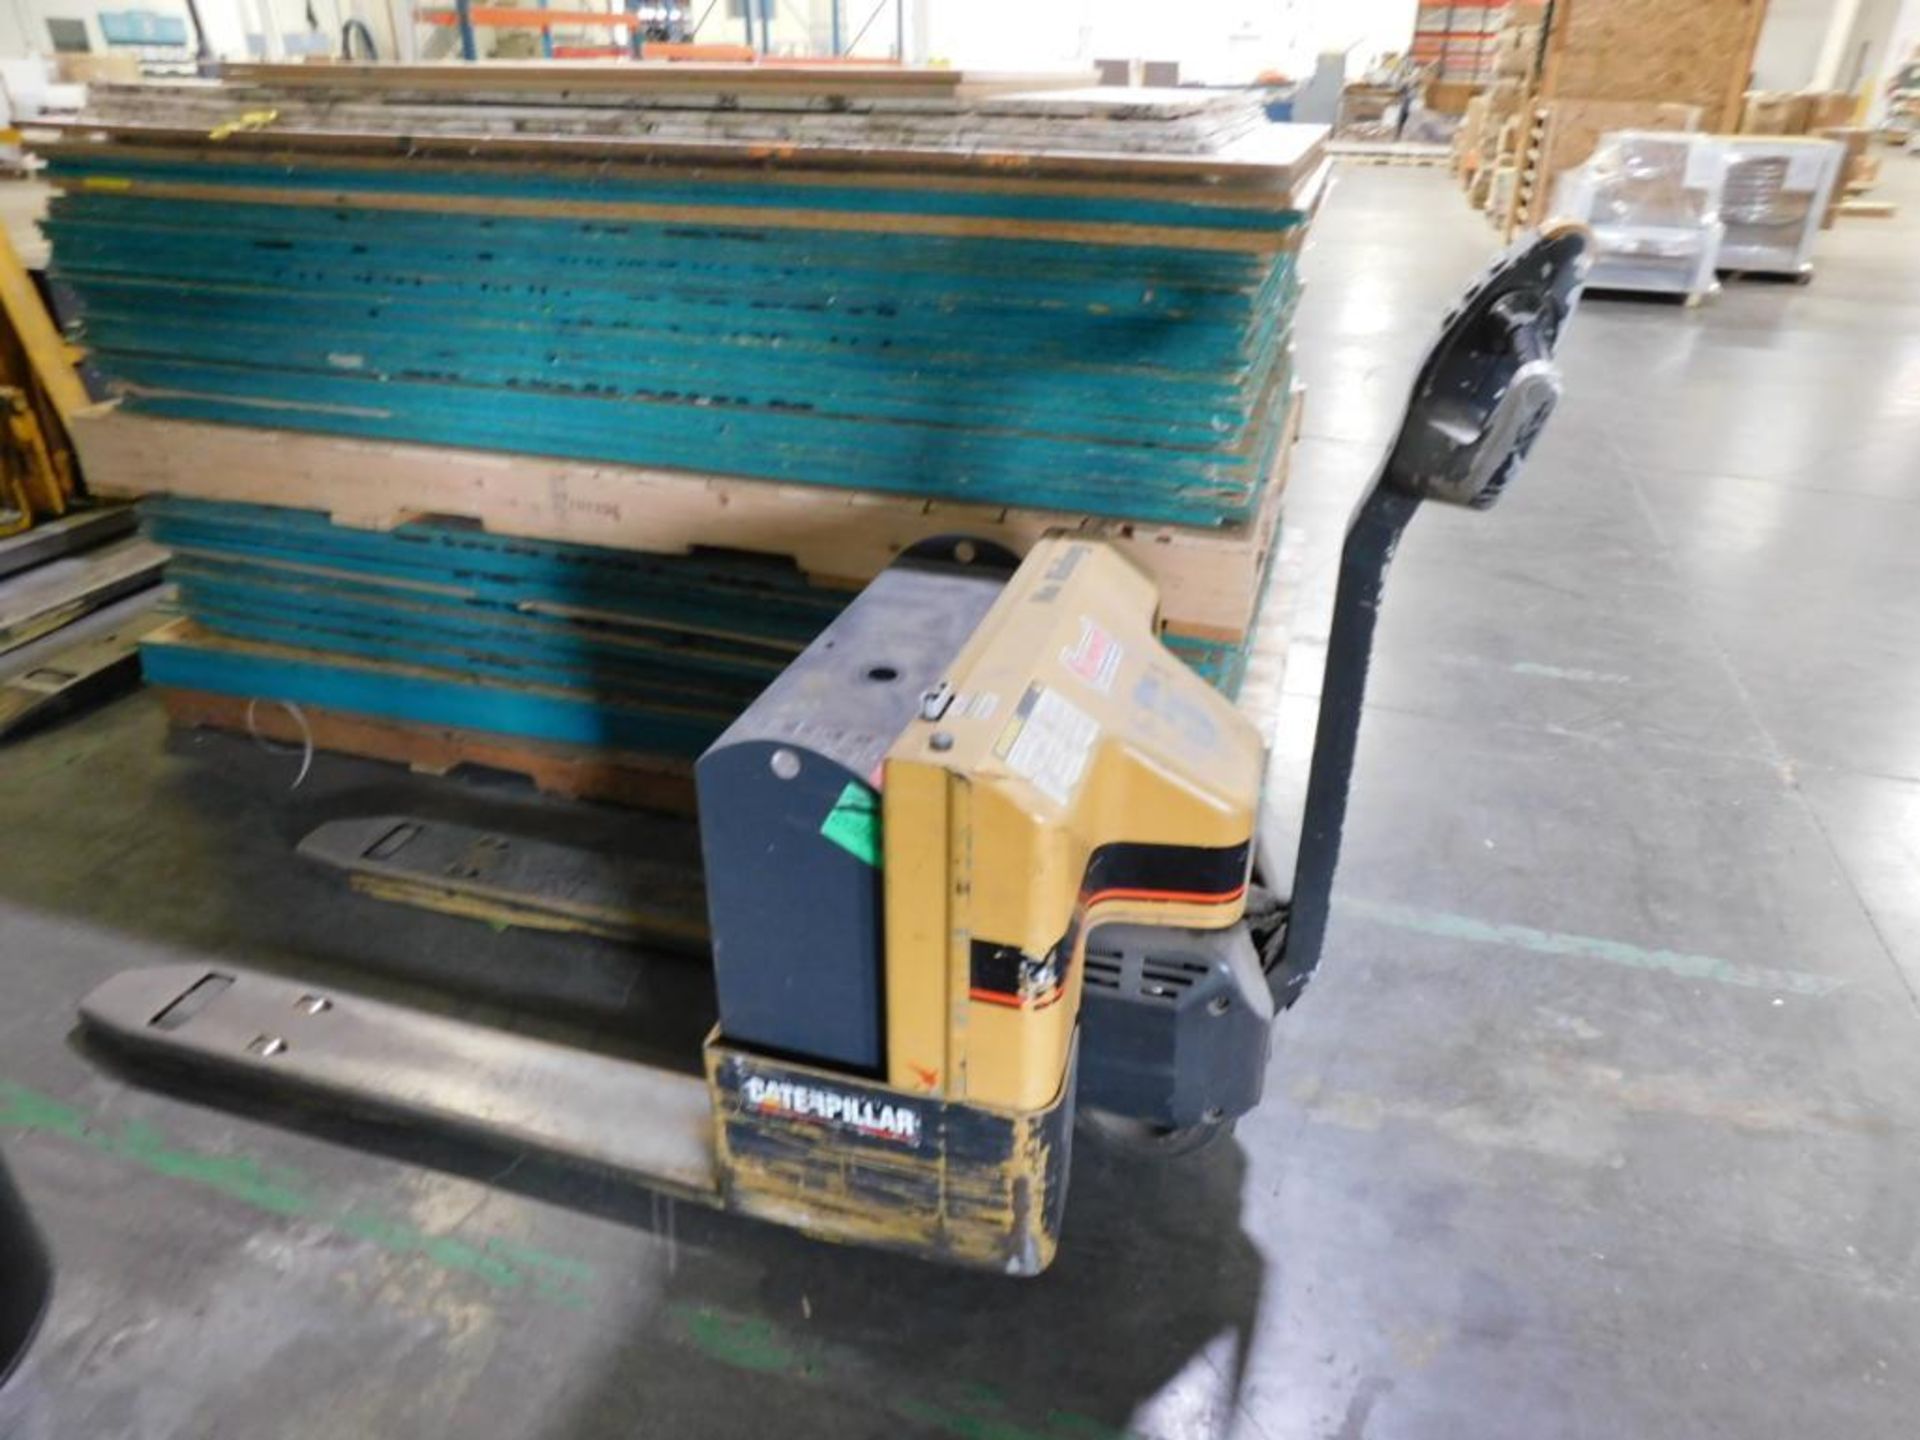 Caterpillar Electric Pallet Jack Model NPH40, S/N 2CL05414 (no battery) (LOCATED IN MINNEAPOLIS, MN.